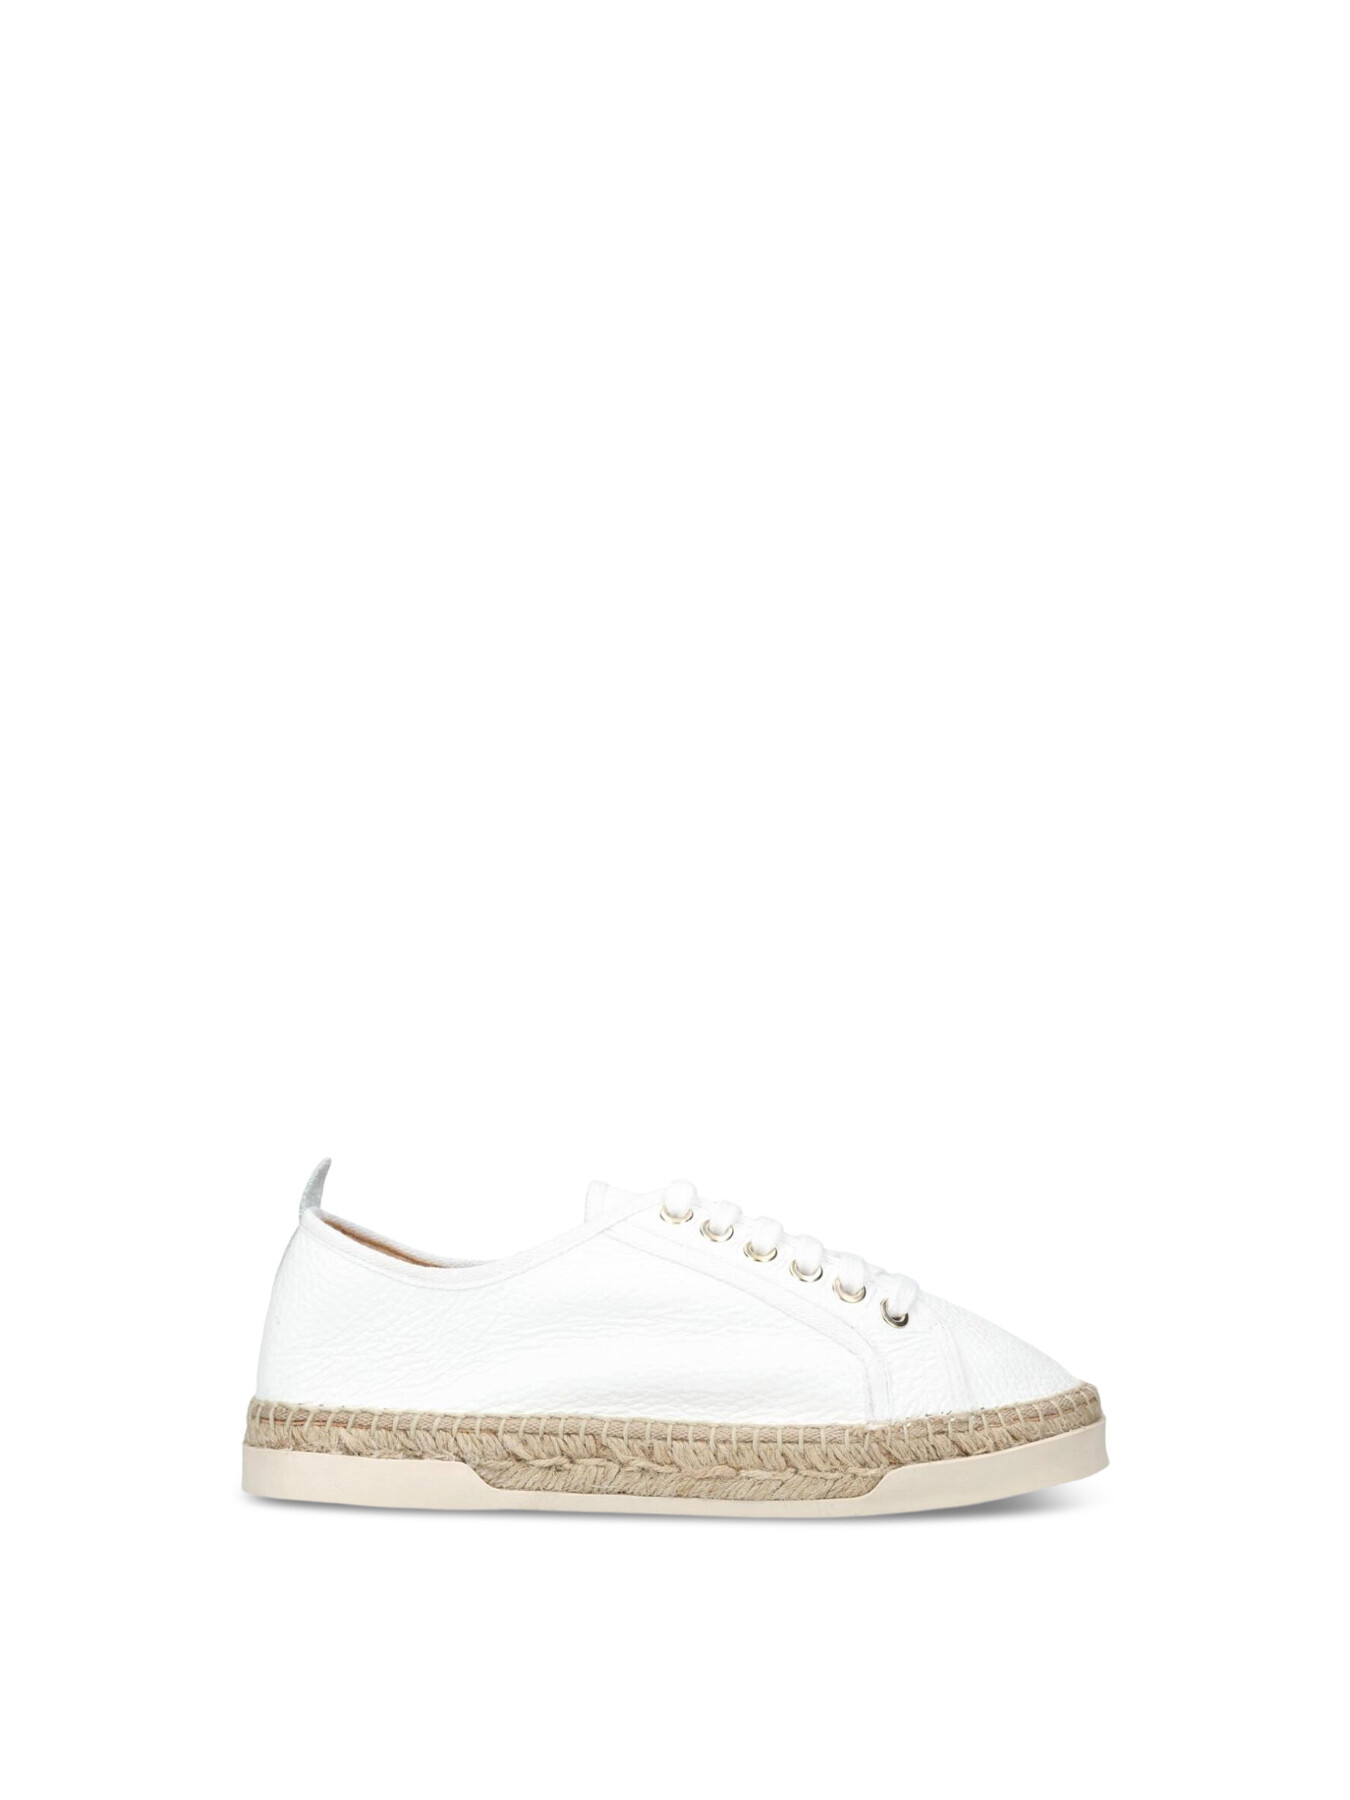 Women's CARVELA COMFORT CRUISE | Lace Up Trainers | Fenwick